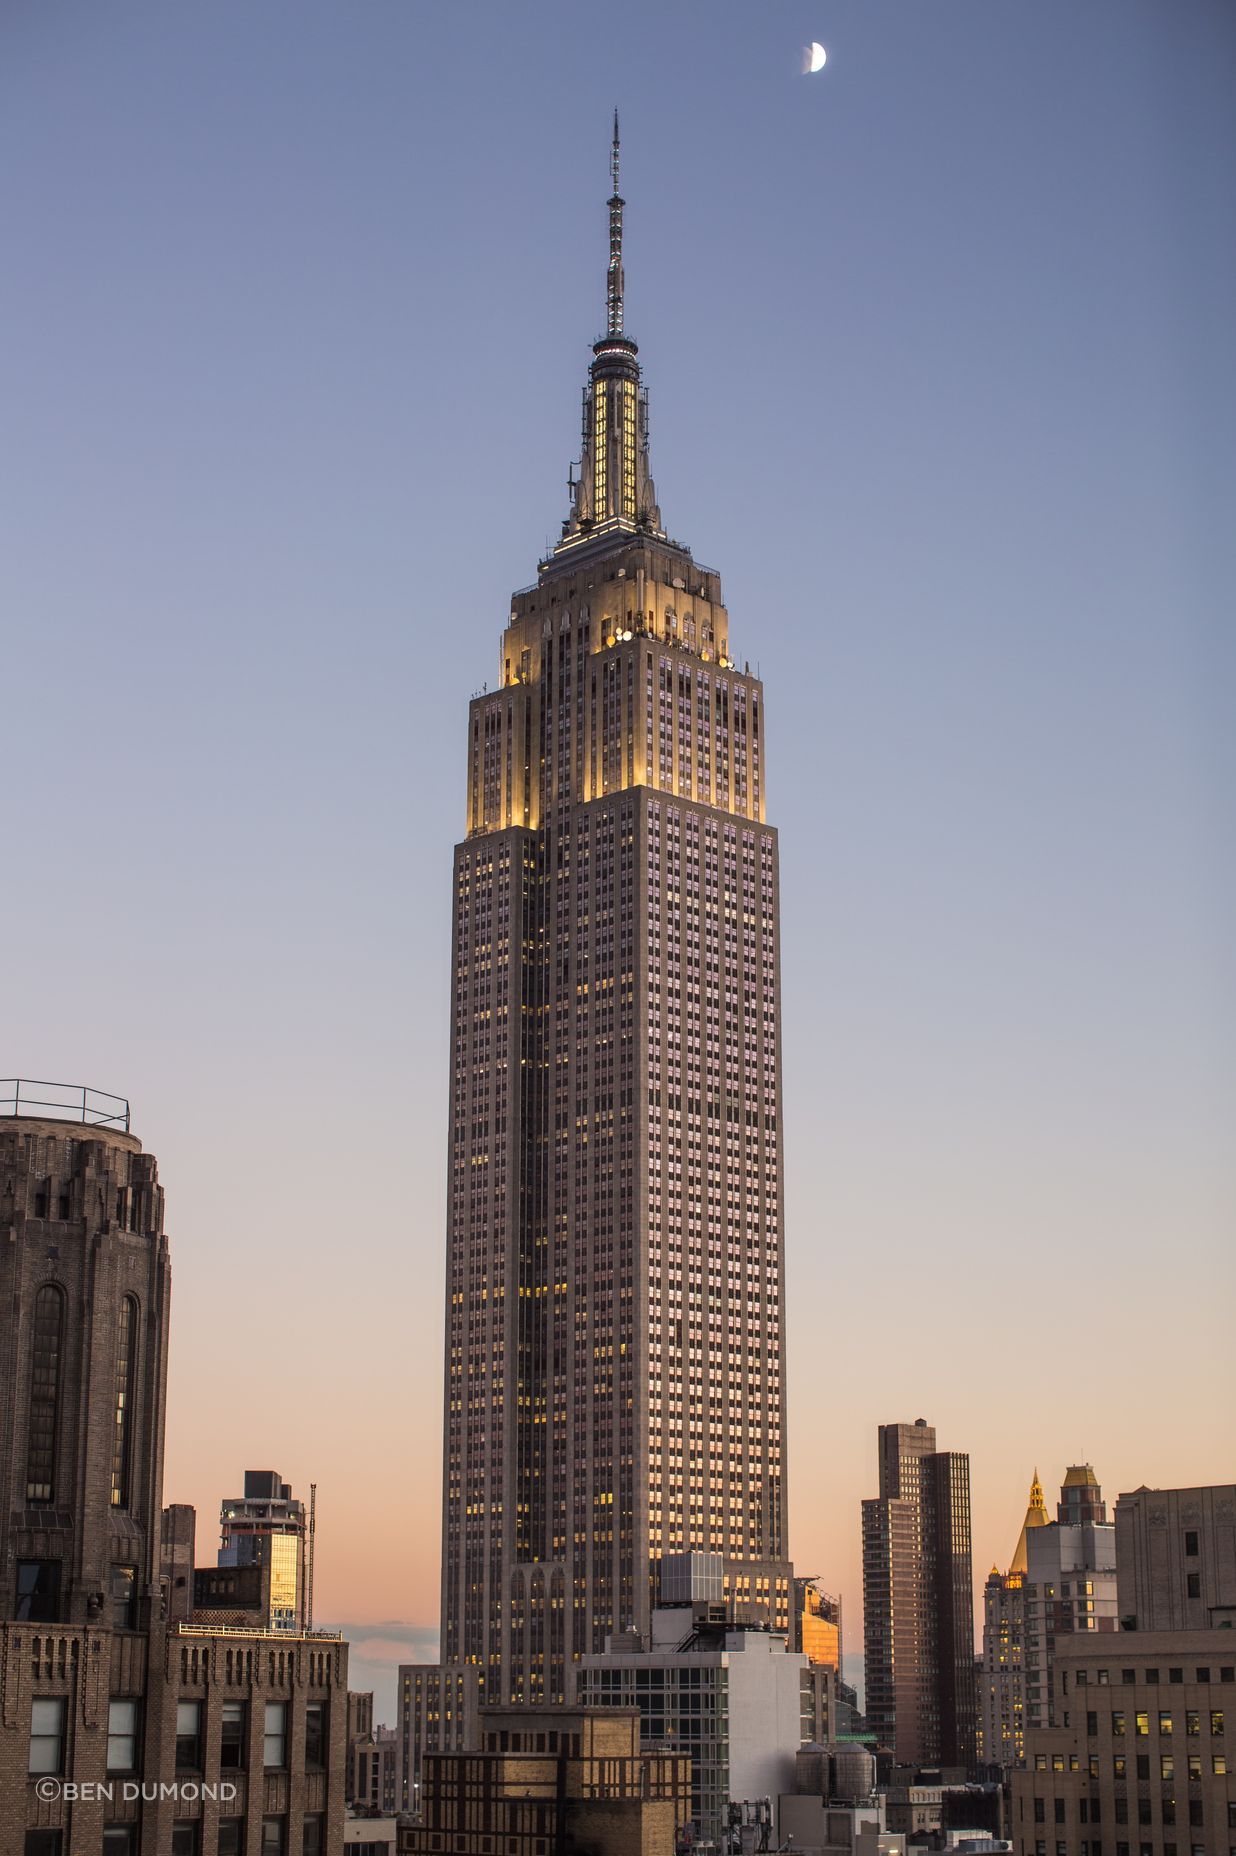 The Empire State Building was built with 10 million bricks